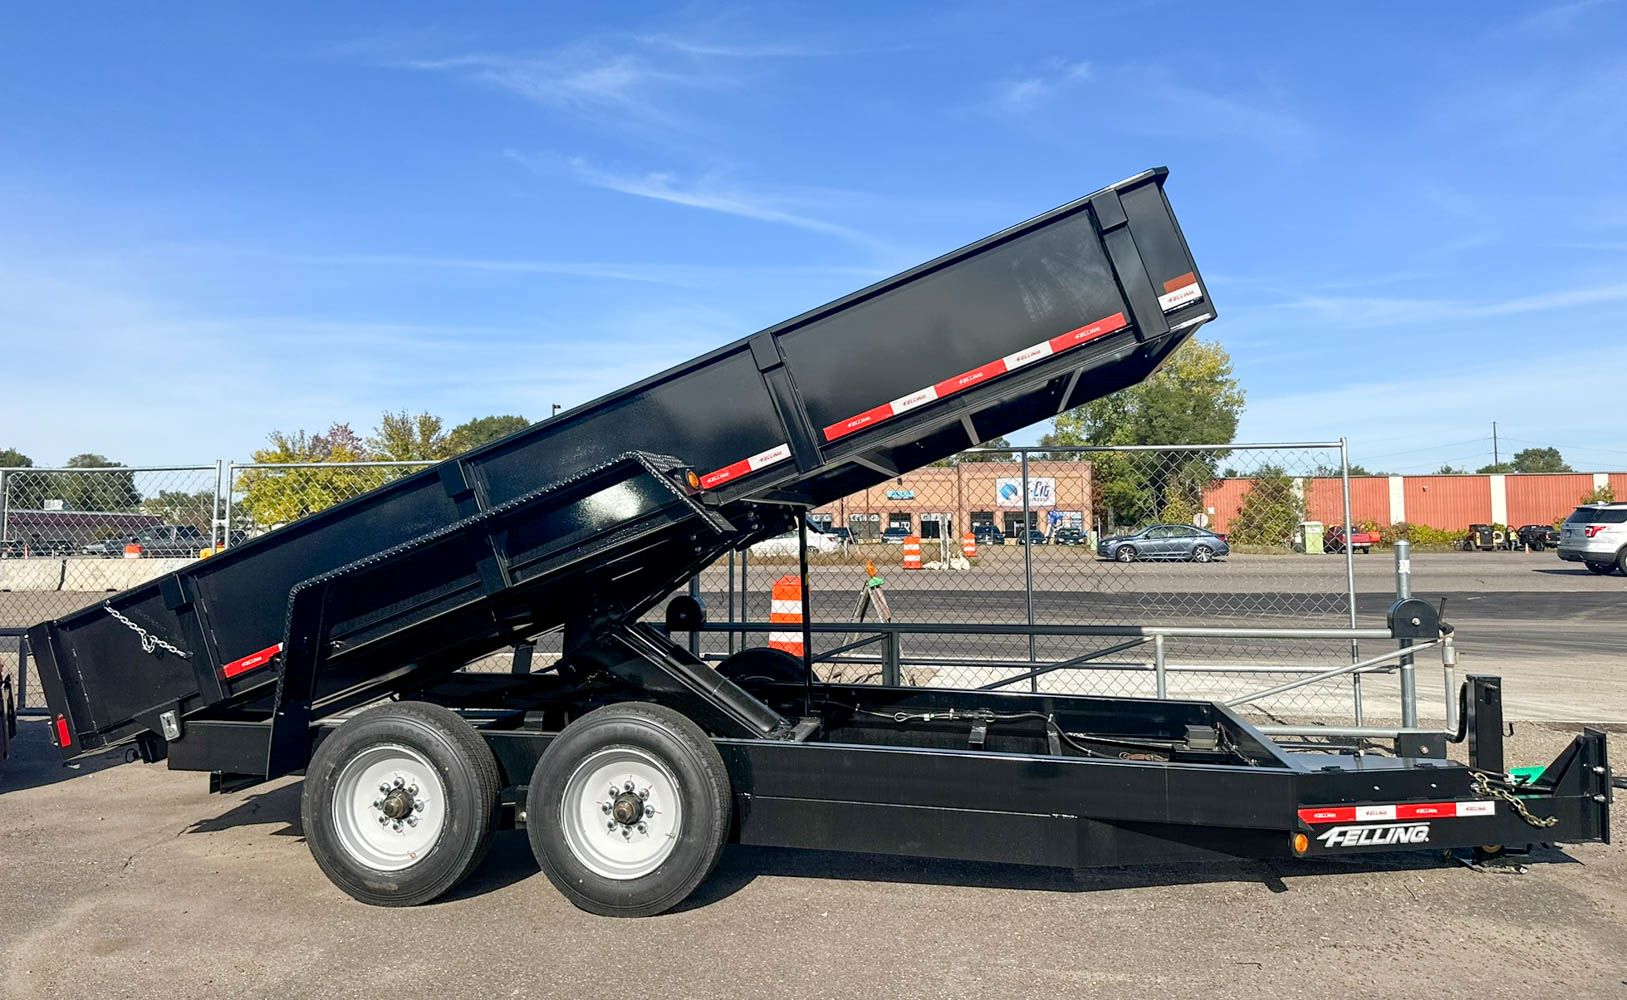 DIY Dump Trailer: How To Build Your Own